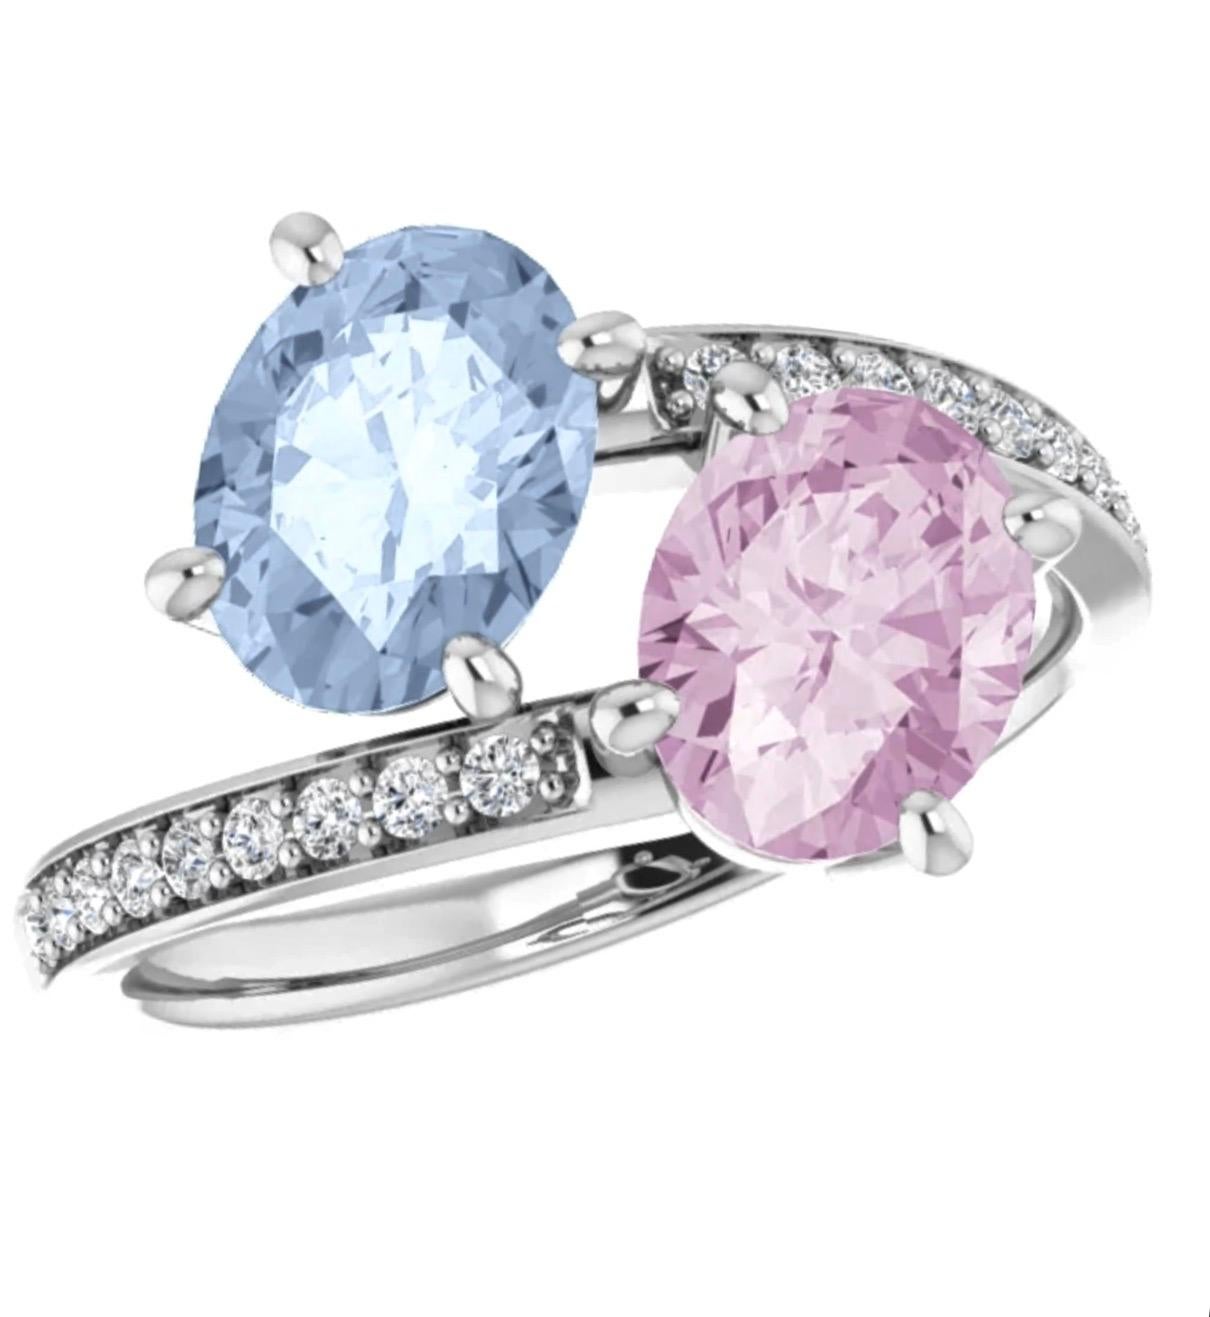 ***Made to order to your finger size, custom options are available, don't hesitate to inquire***
Inseparable, unheated fancy oval blue and pink Sapphire mismatched pair, totaling 2.44 carats, are decorated with round brilliant diamonds, totaling